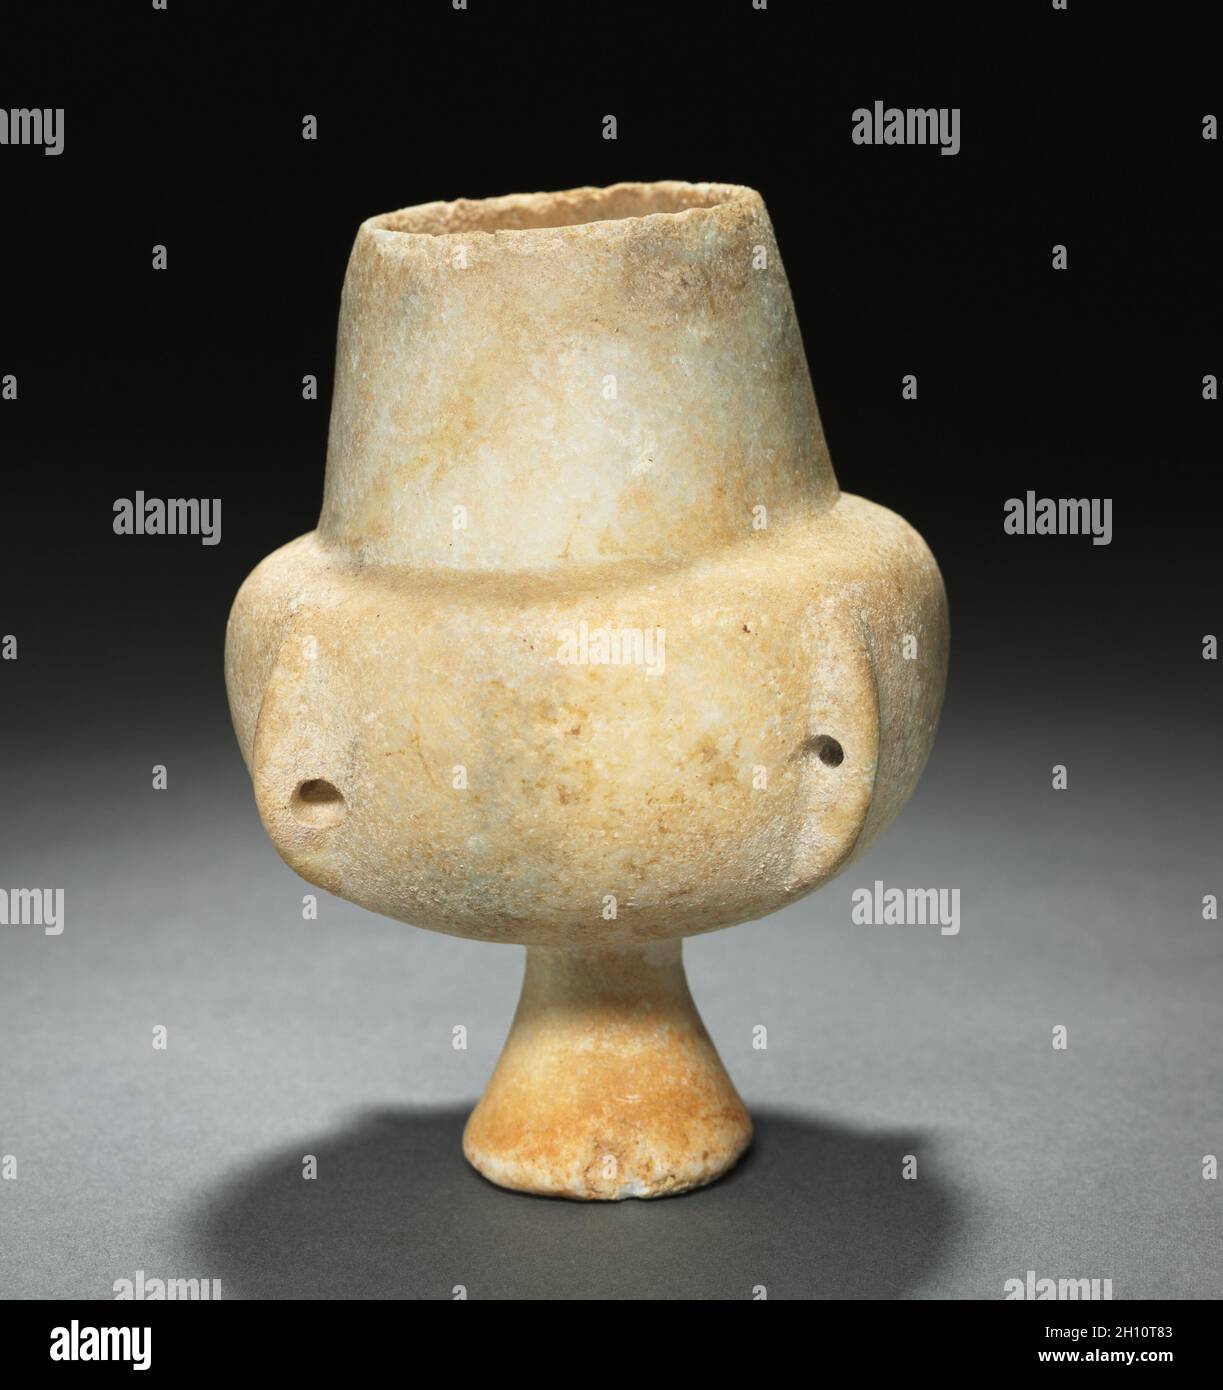 Kandila (Collared Jar with Conical Foot), 3000-2800 BC. Master A (Greek). Marble; overall: 10.7 x 12.9 cm (4 3/16 x 5 1/16 in.). Stock Photo